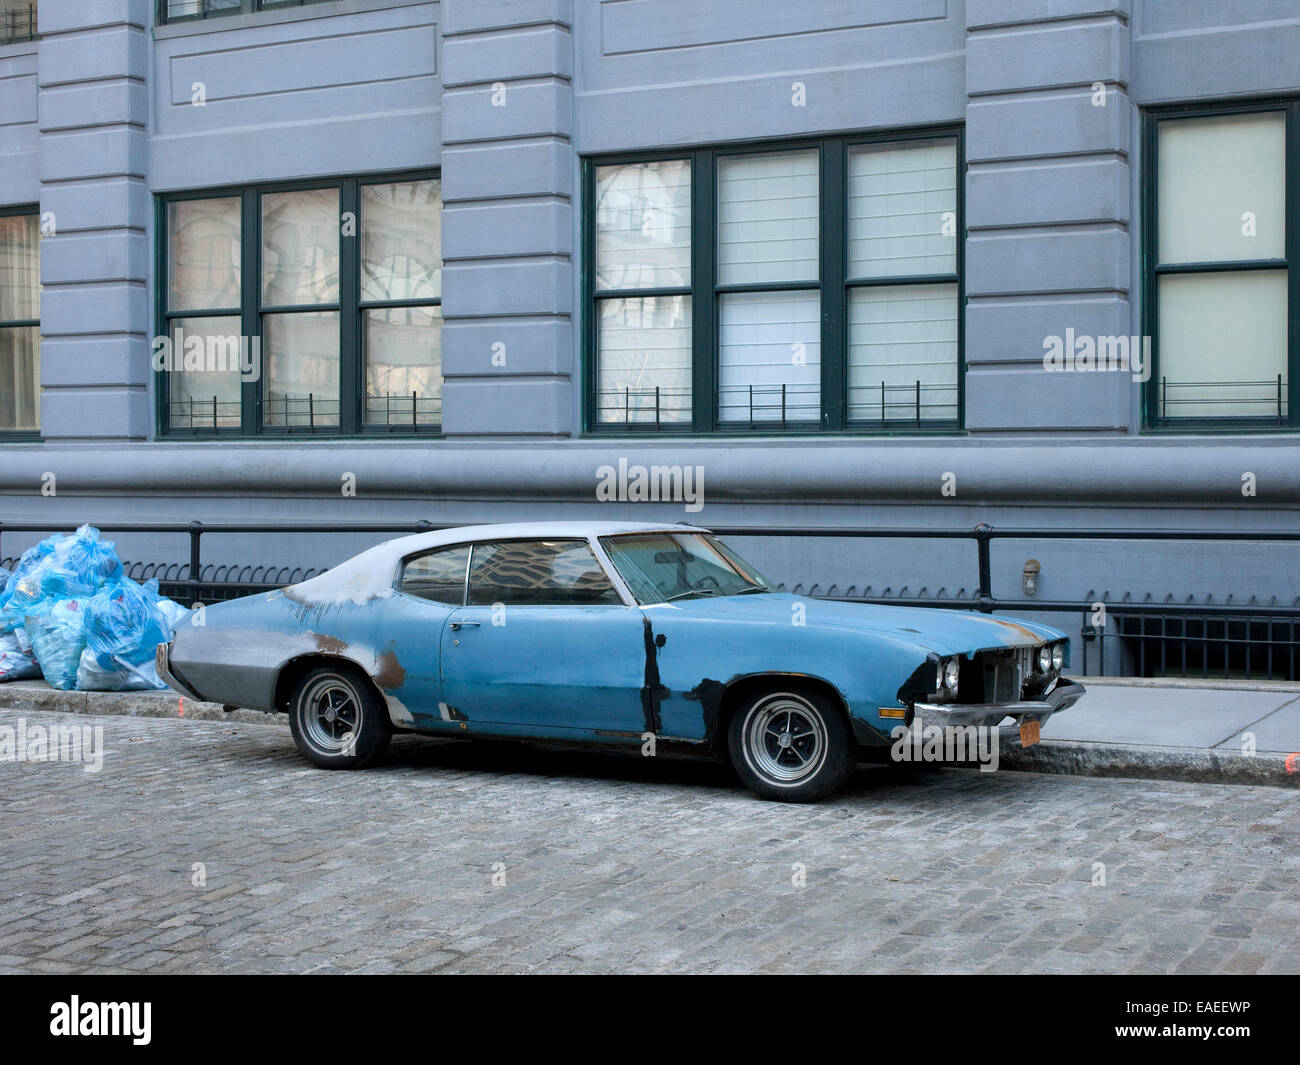 powder blue seventies muscle car on cobblestone street in city Stock Photo